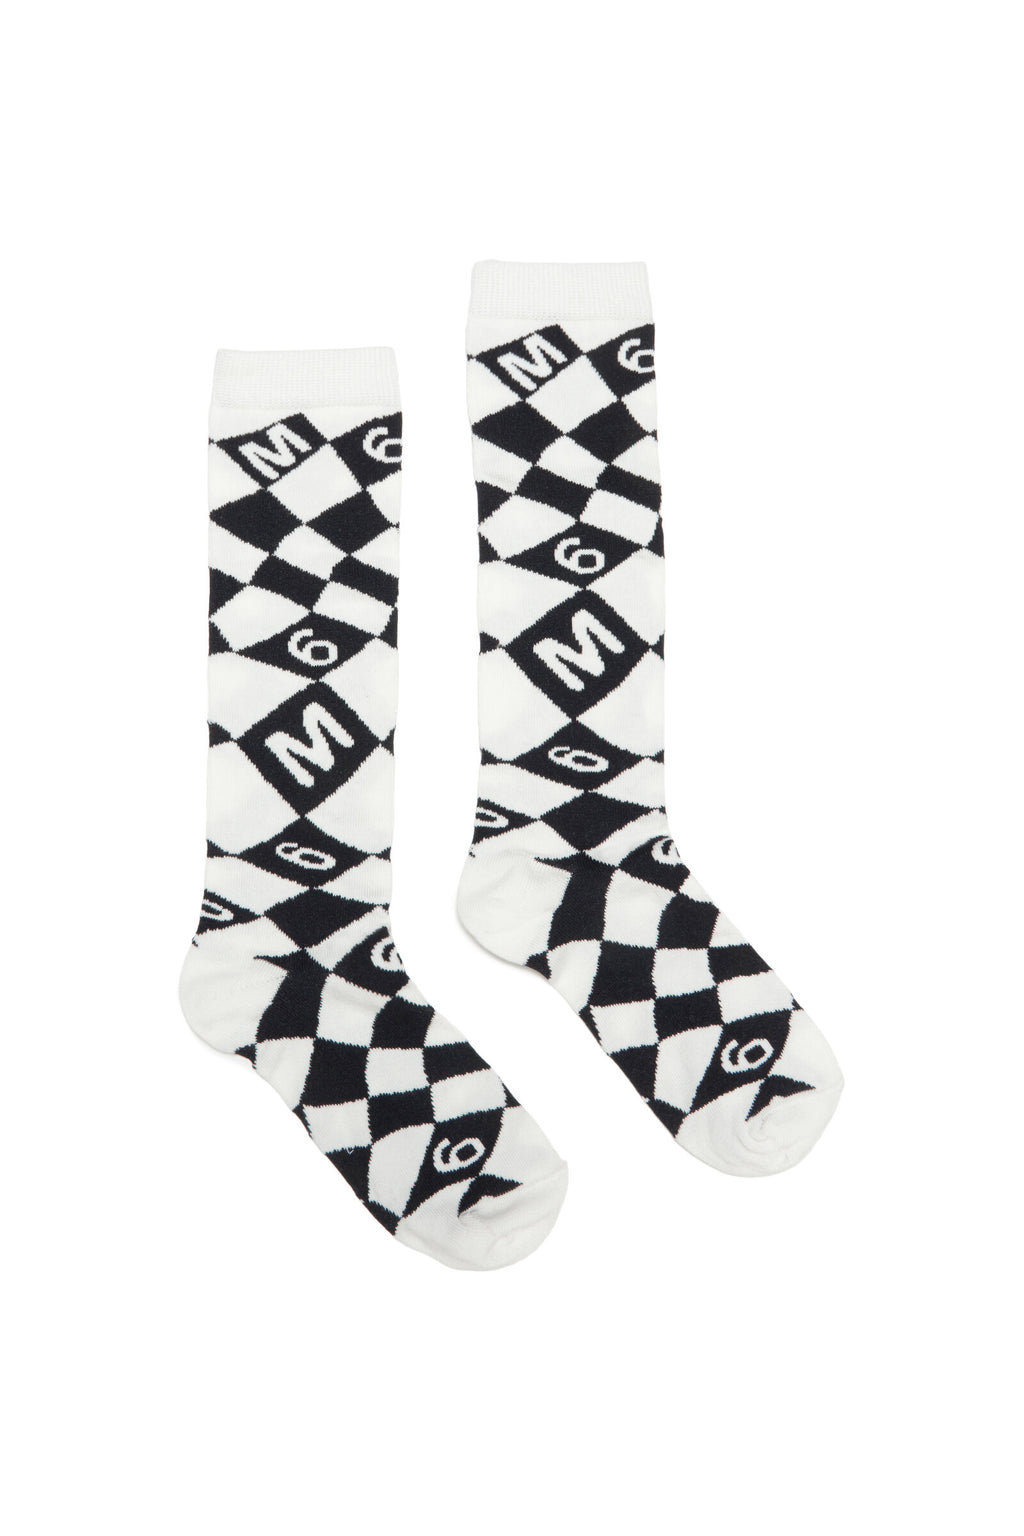 Black and white jacquard cotton-blend socks with chequered pattern